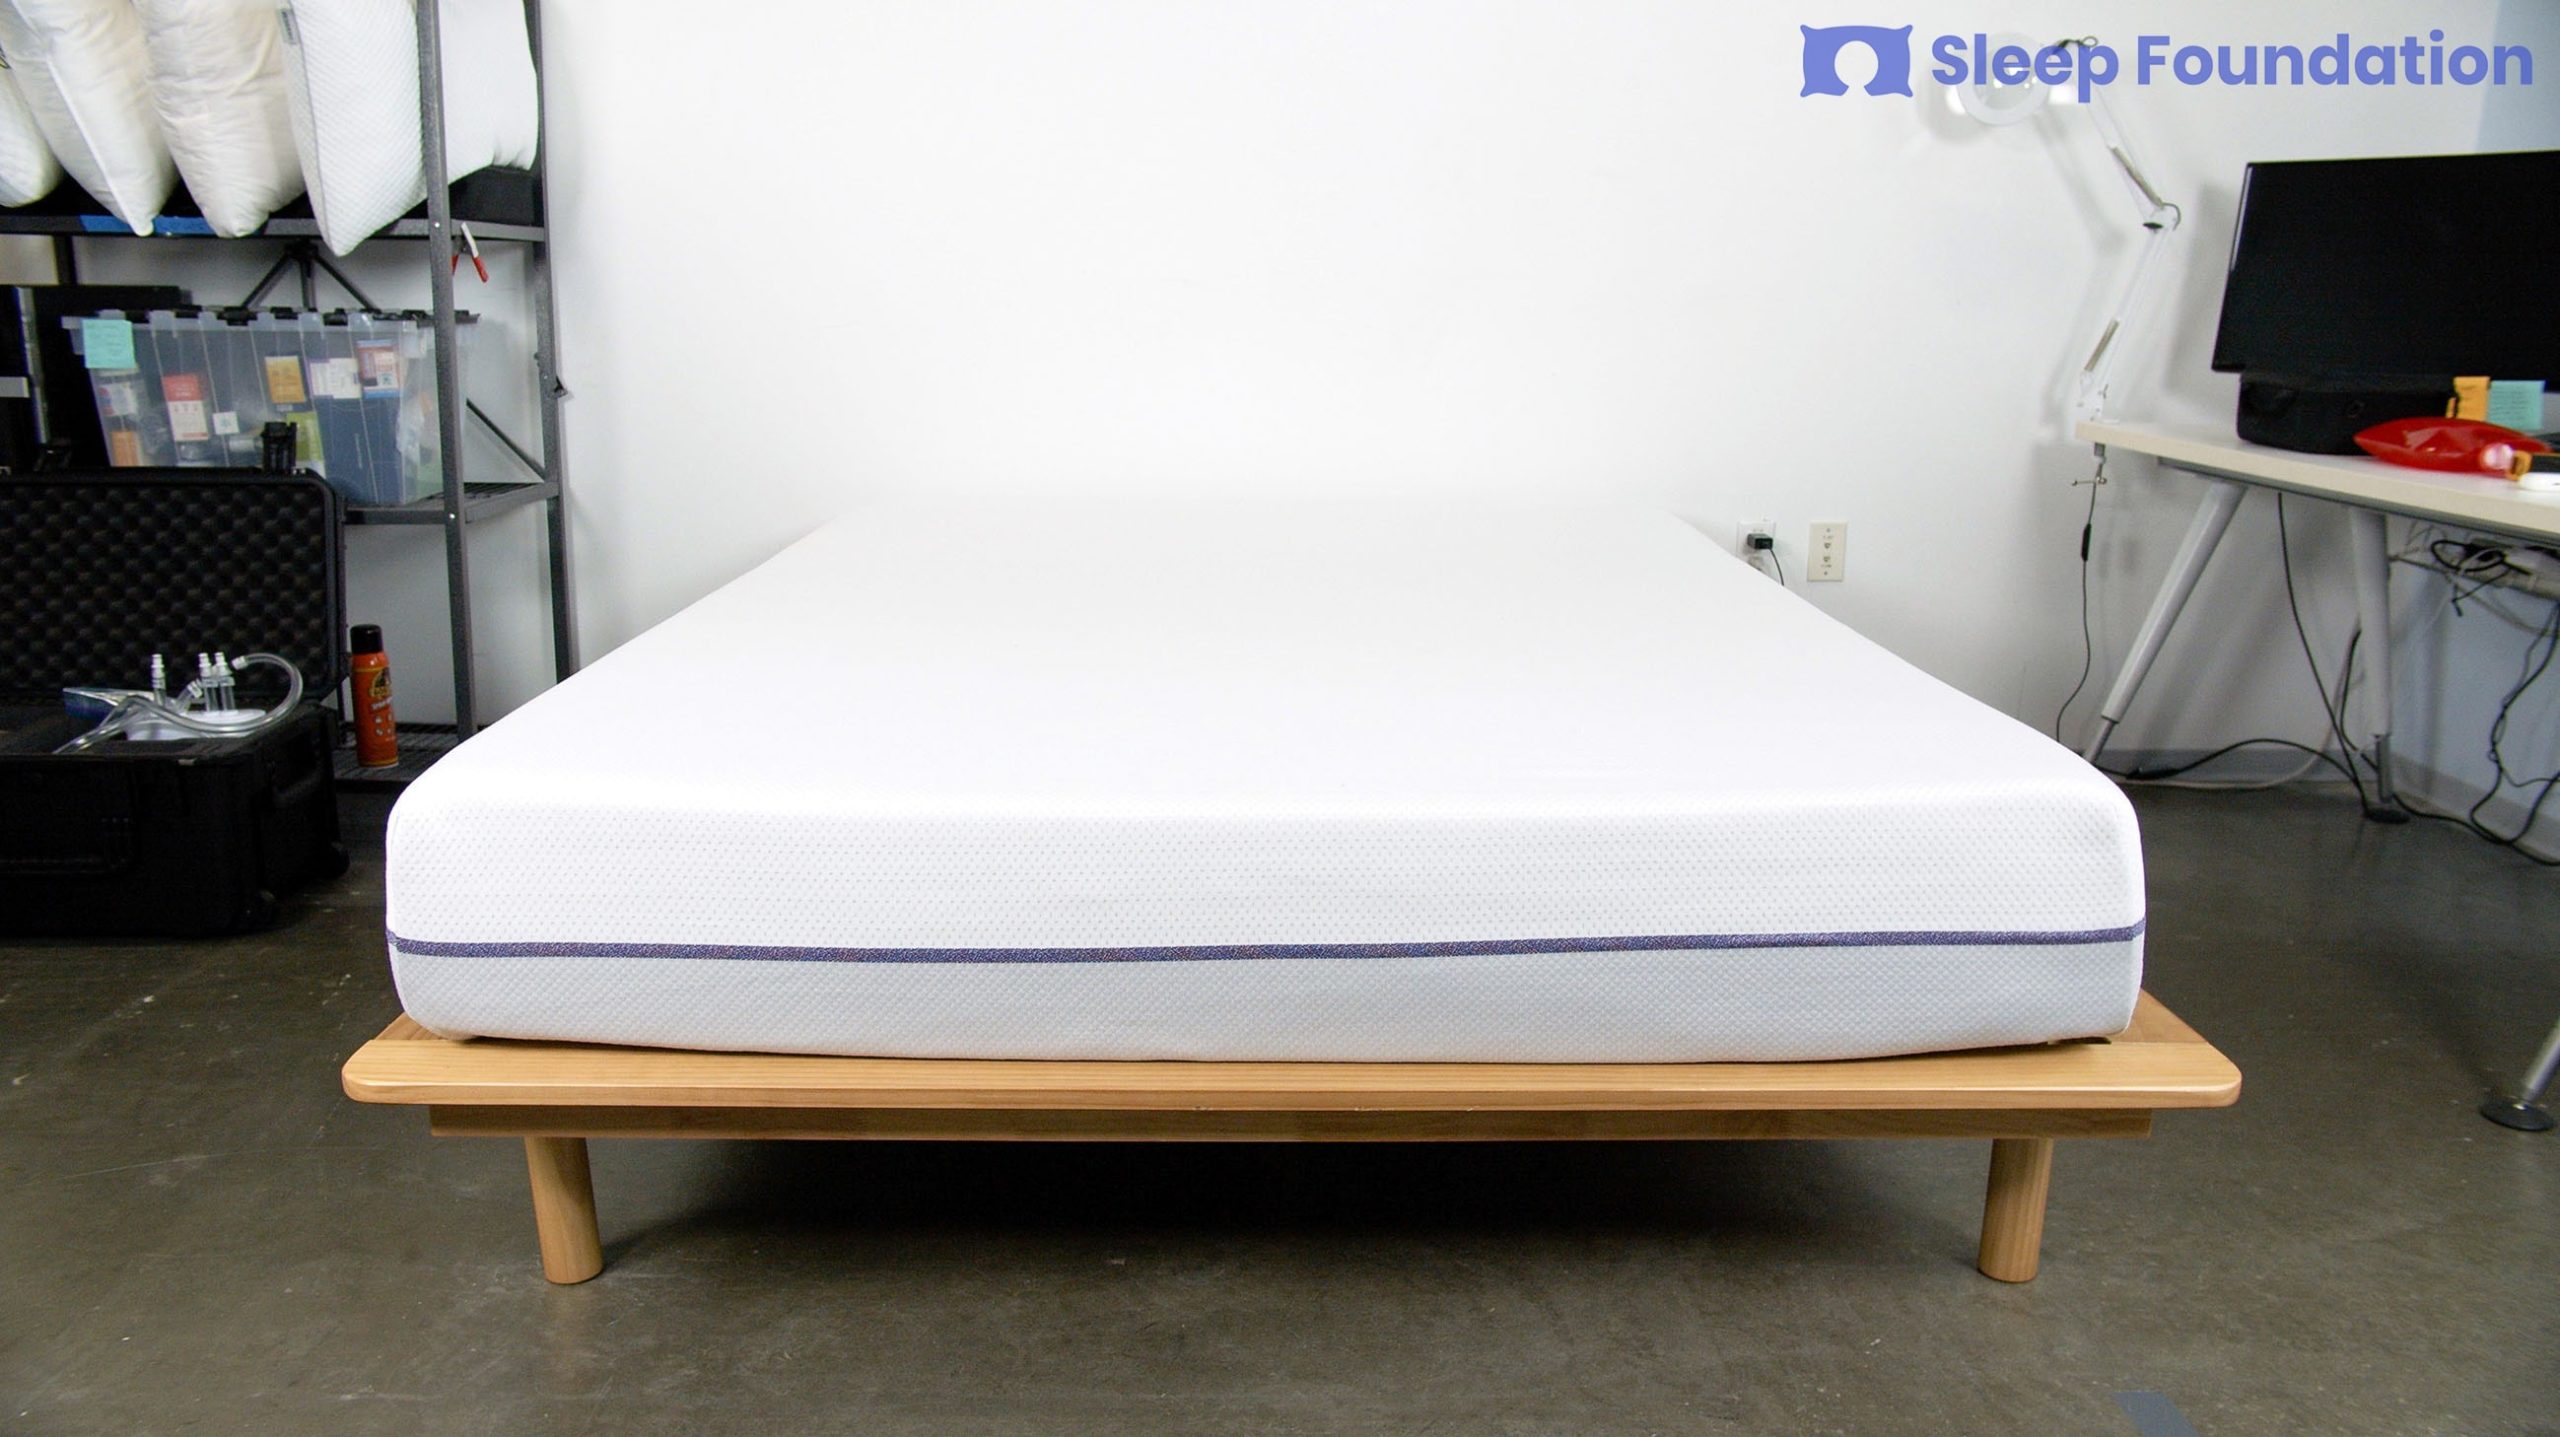 place to try purple mattress